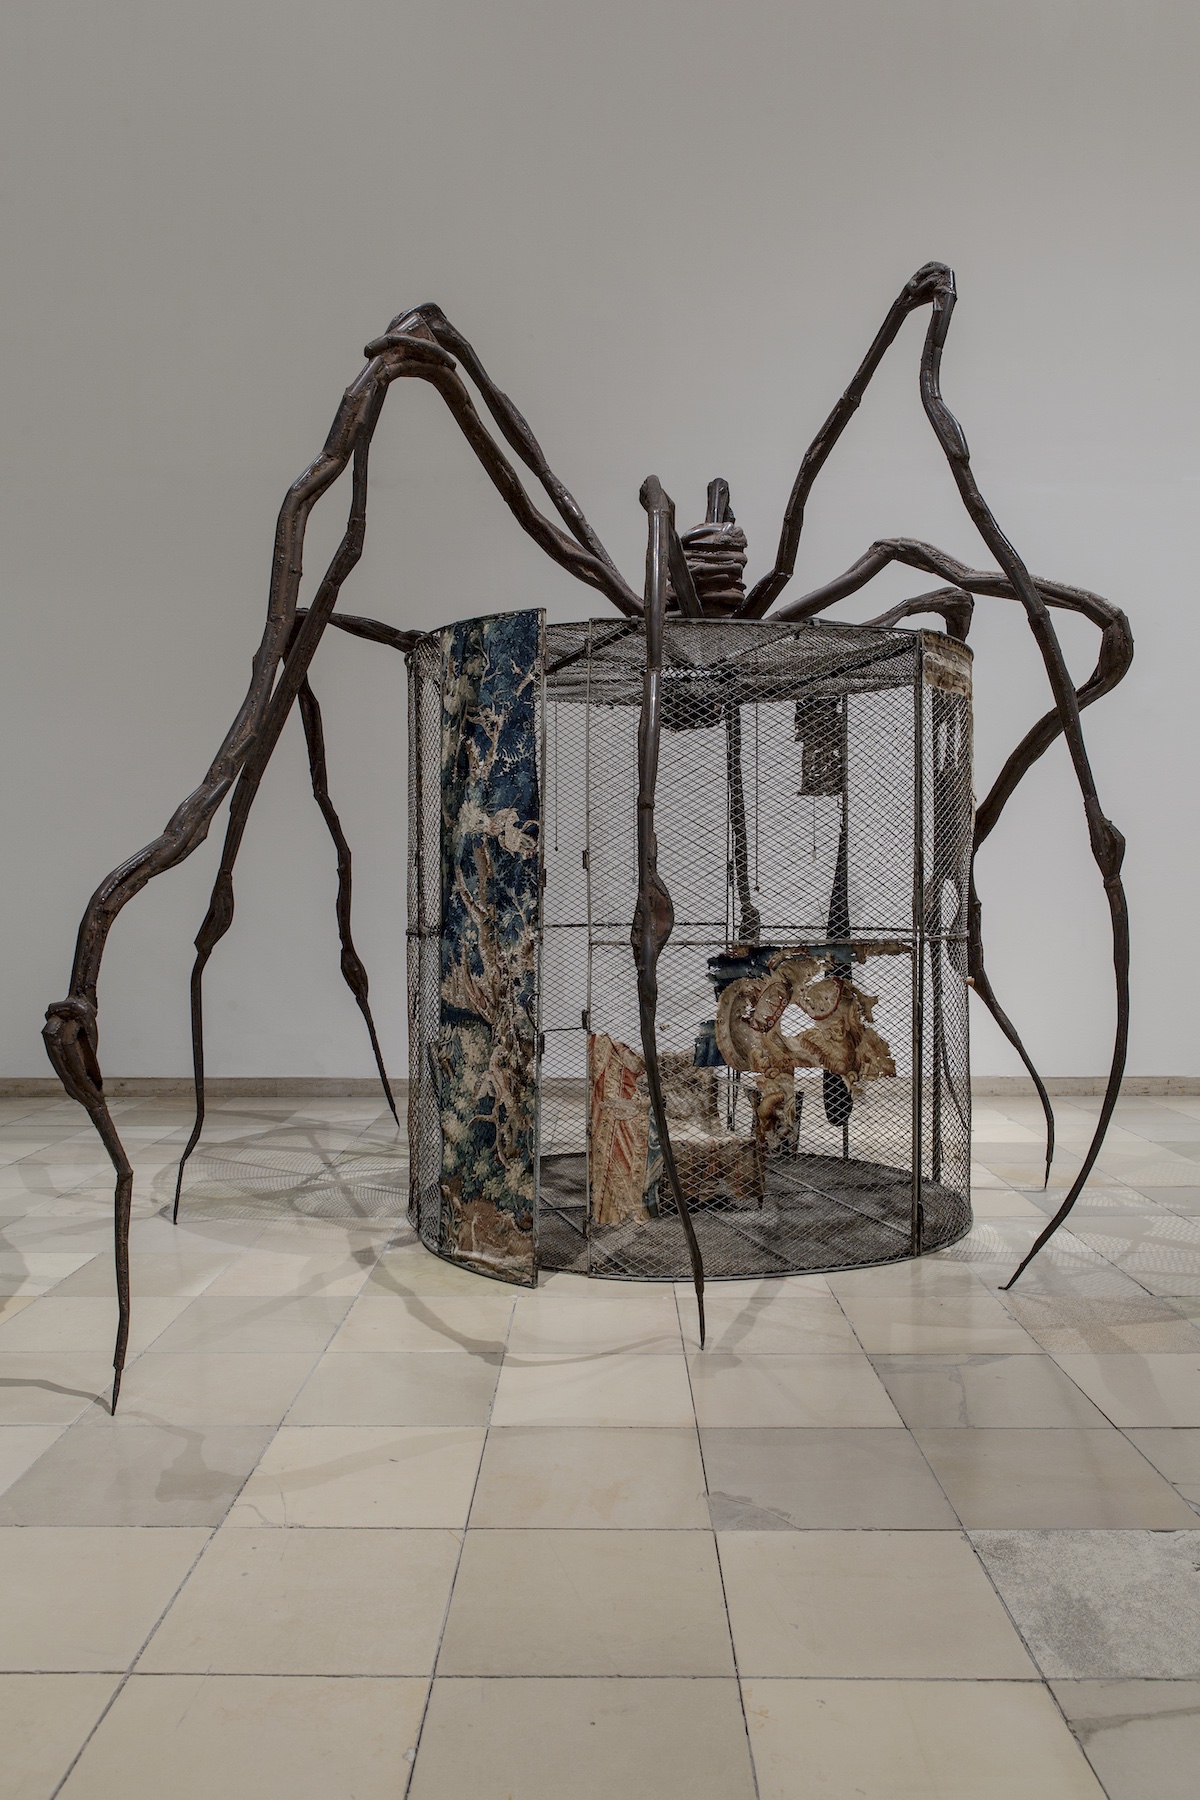 The Wick - Louise Bourgeois
Spider, 1997
Steel, tapestry, wood, glass, fabric, rubber, silver, gold and bone
449.6 x 665.5 x 518.2 cm.
© The Easton Foundation/VAGA at ARS, NY and DACS, London 2021. Photo: Maximilian Geuter